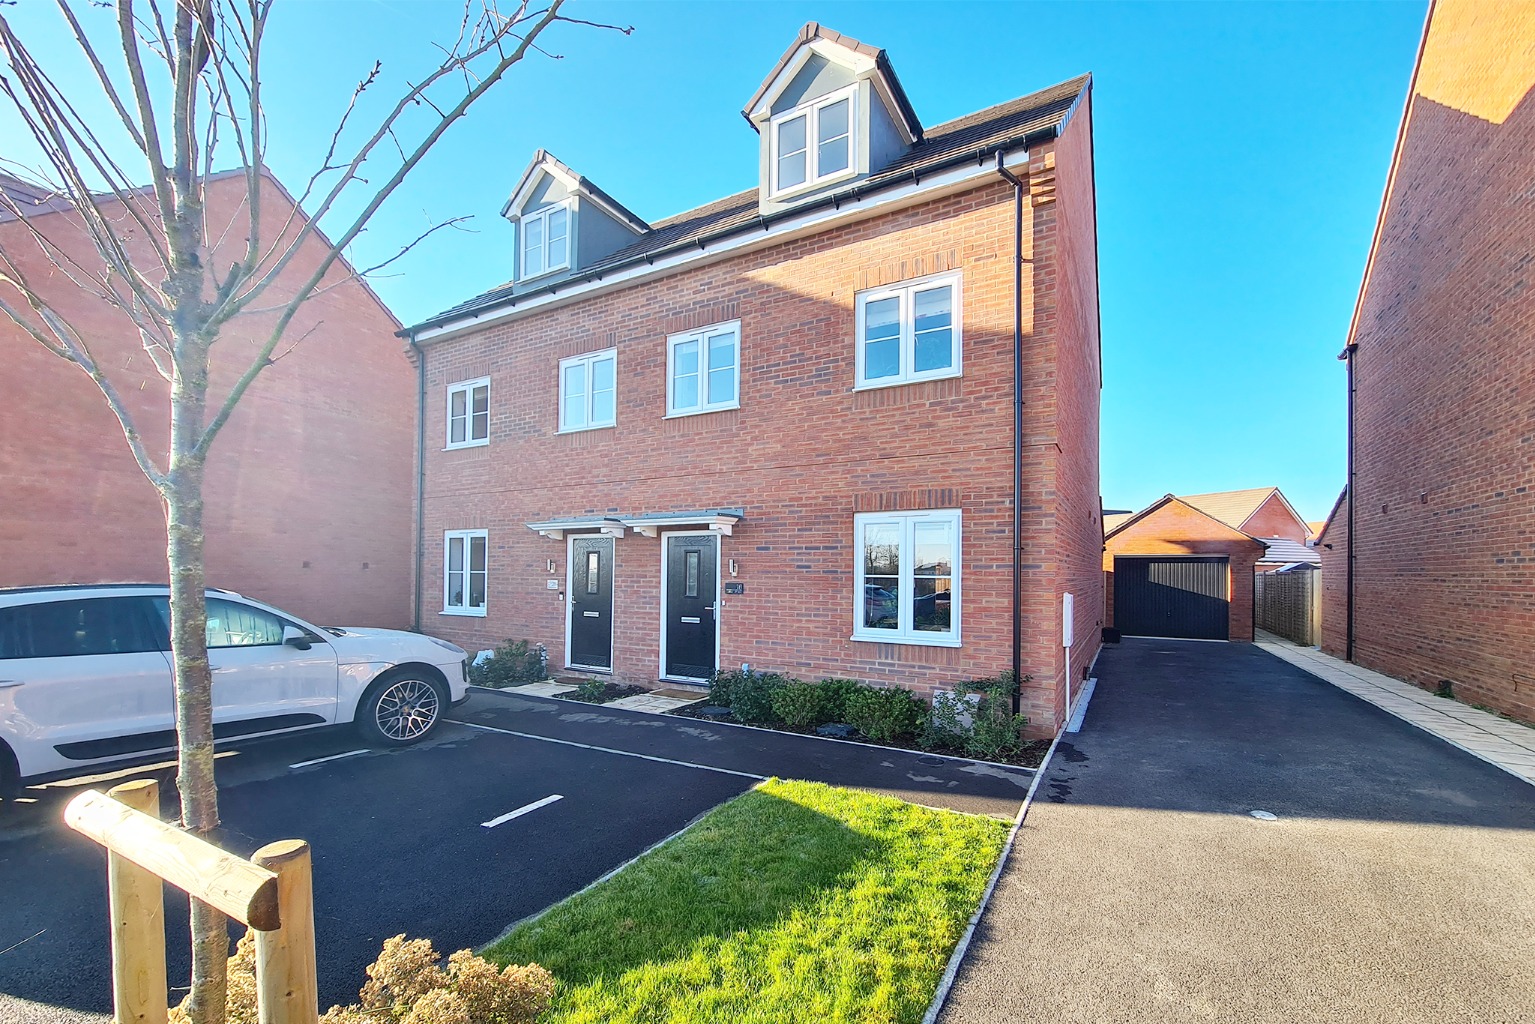 Three bedroom properties in Shinfield Meadows do not stay on the market for long! I am delighted to offer this three double bedroom town house which includes garage, drive way parking for 3 cars and two bathrooms!  The property will be available from the 14th March 2022 on an unfurnished basis.